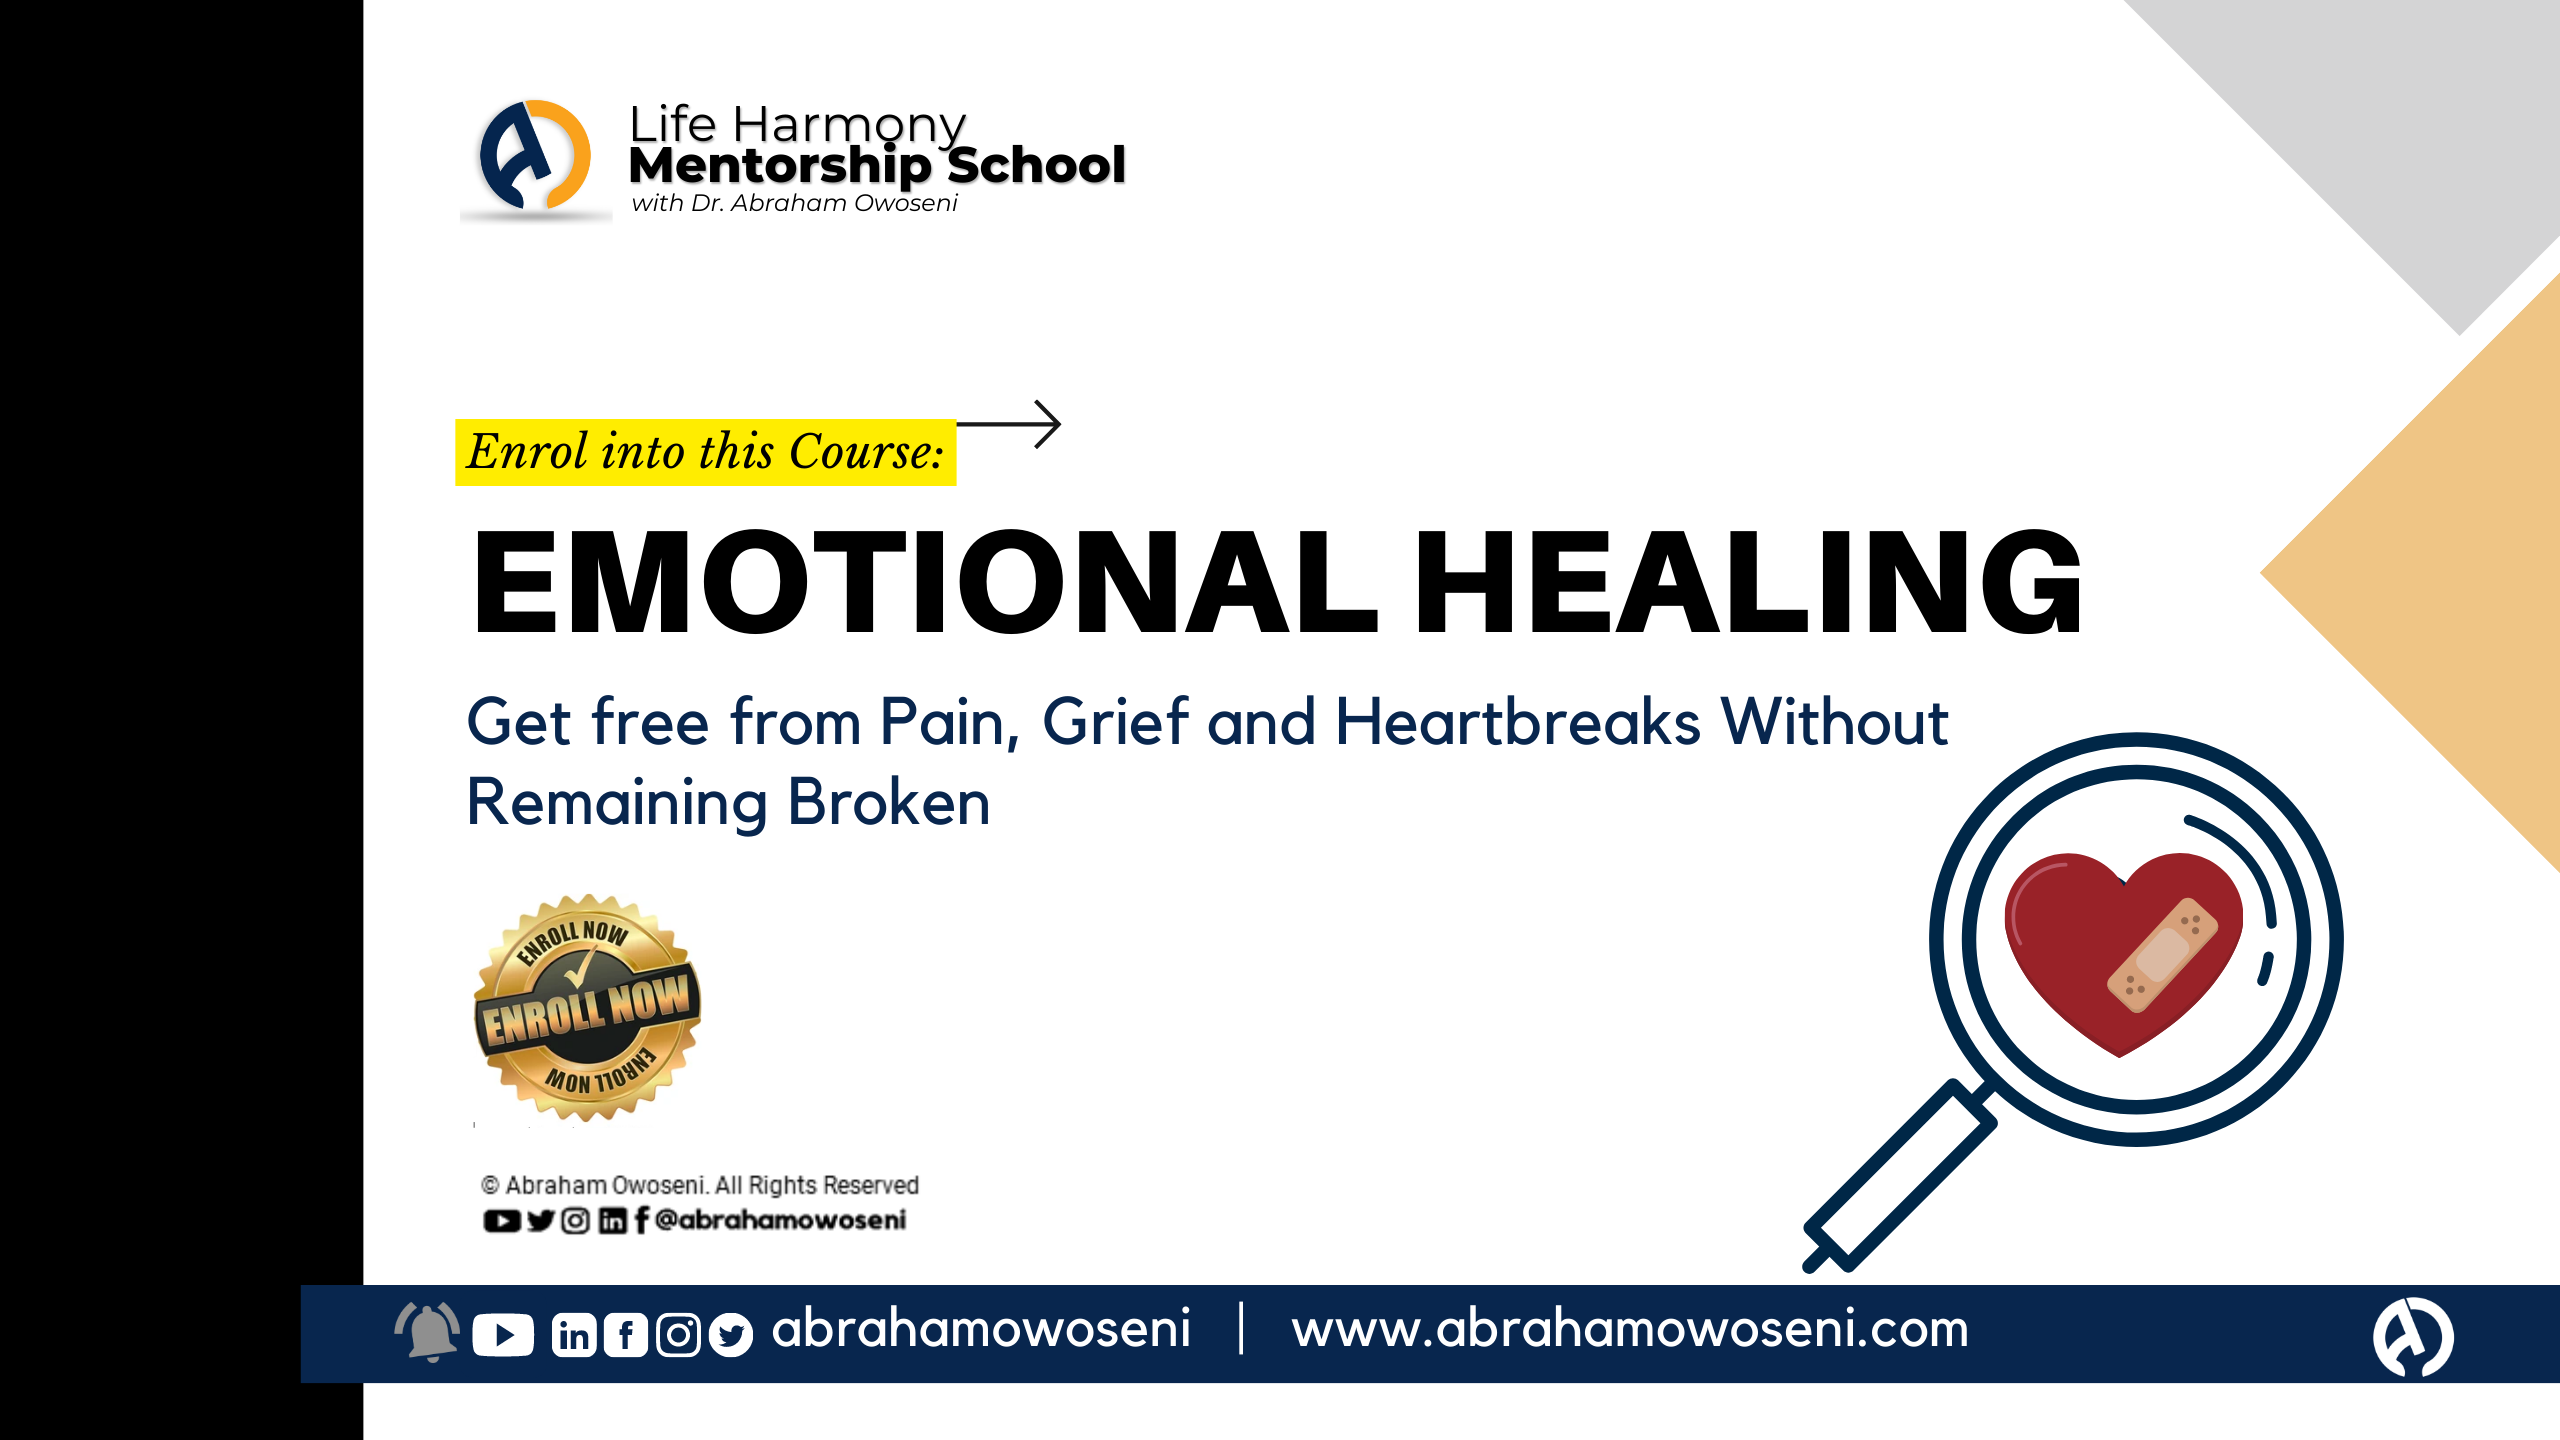 Emotional Healing: Heal from Pain, Grief and Heartbreaks Without Remaining Broken